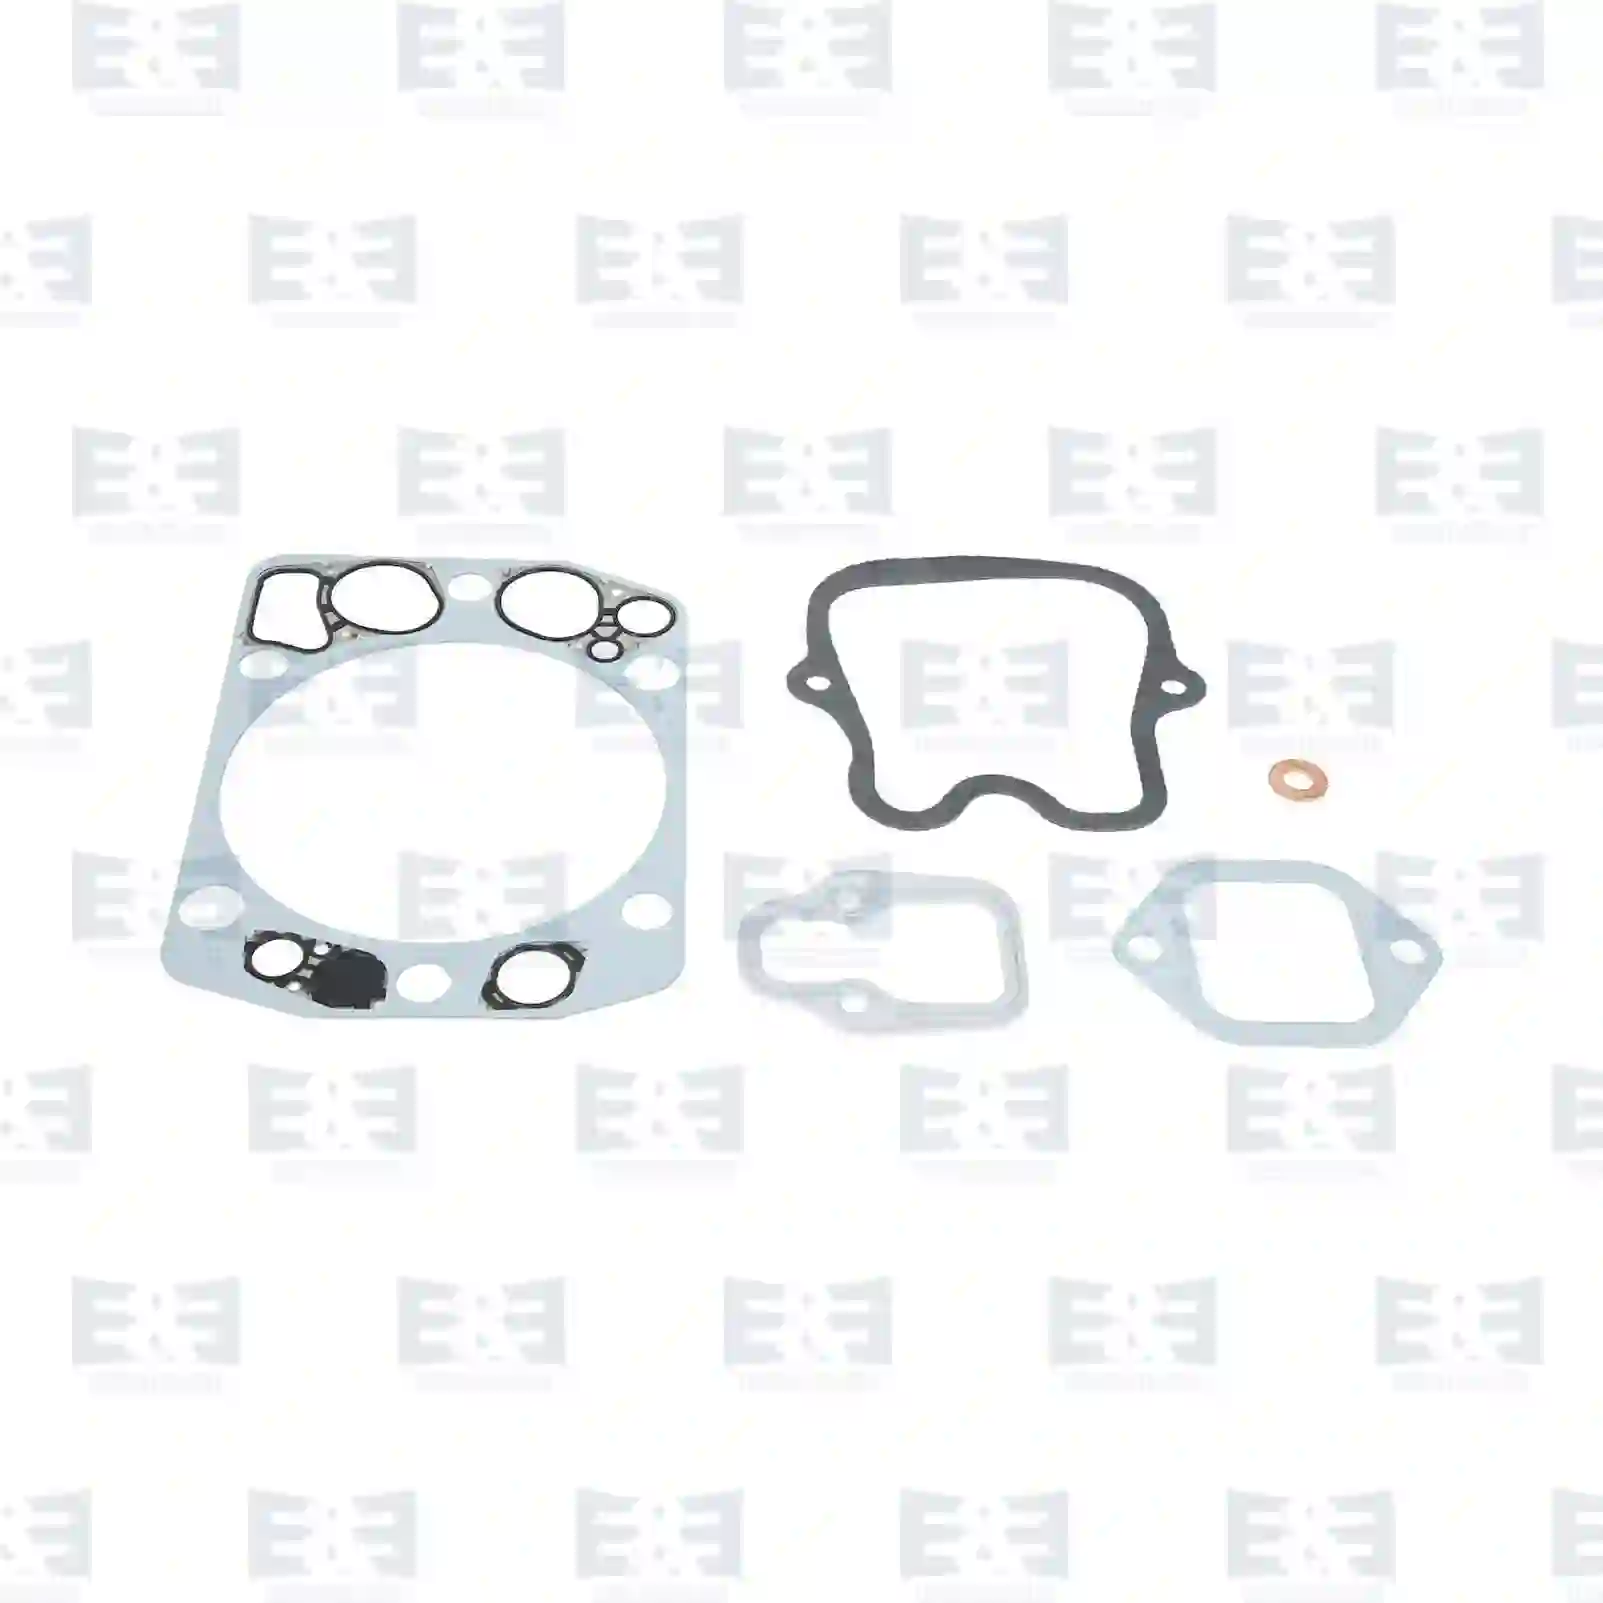 General Overhaul Kits, Engine Cylinder head gasket kit, EE No 2E2209084 ,  oem no:51009006536, 51009006552, 51009006558 E&E Truck Spare Parts | Truck Spare Parts, Auotomotive Spare Parts